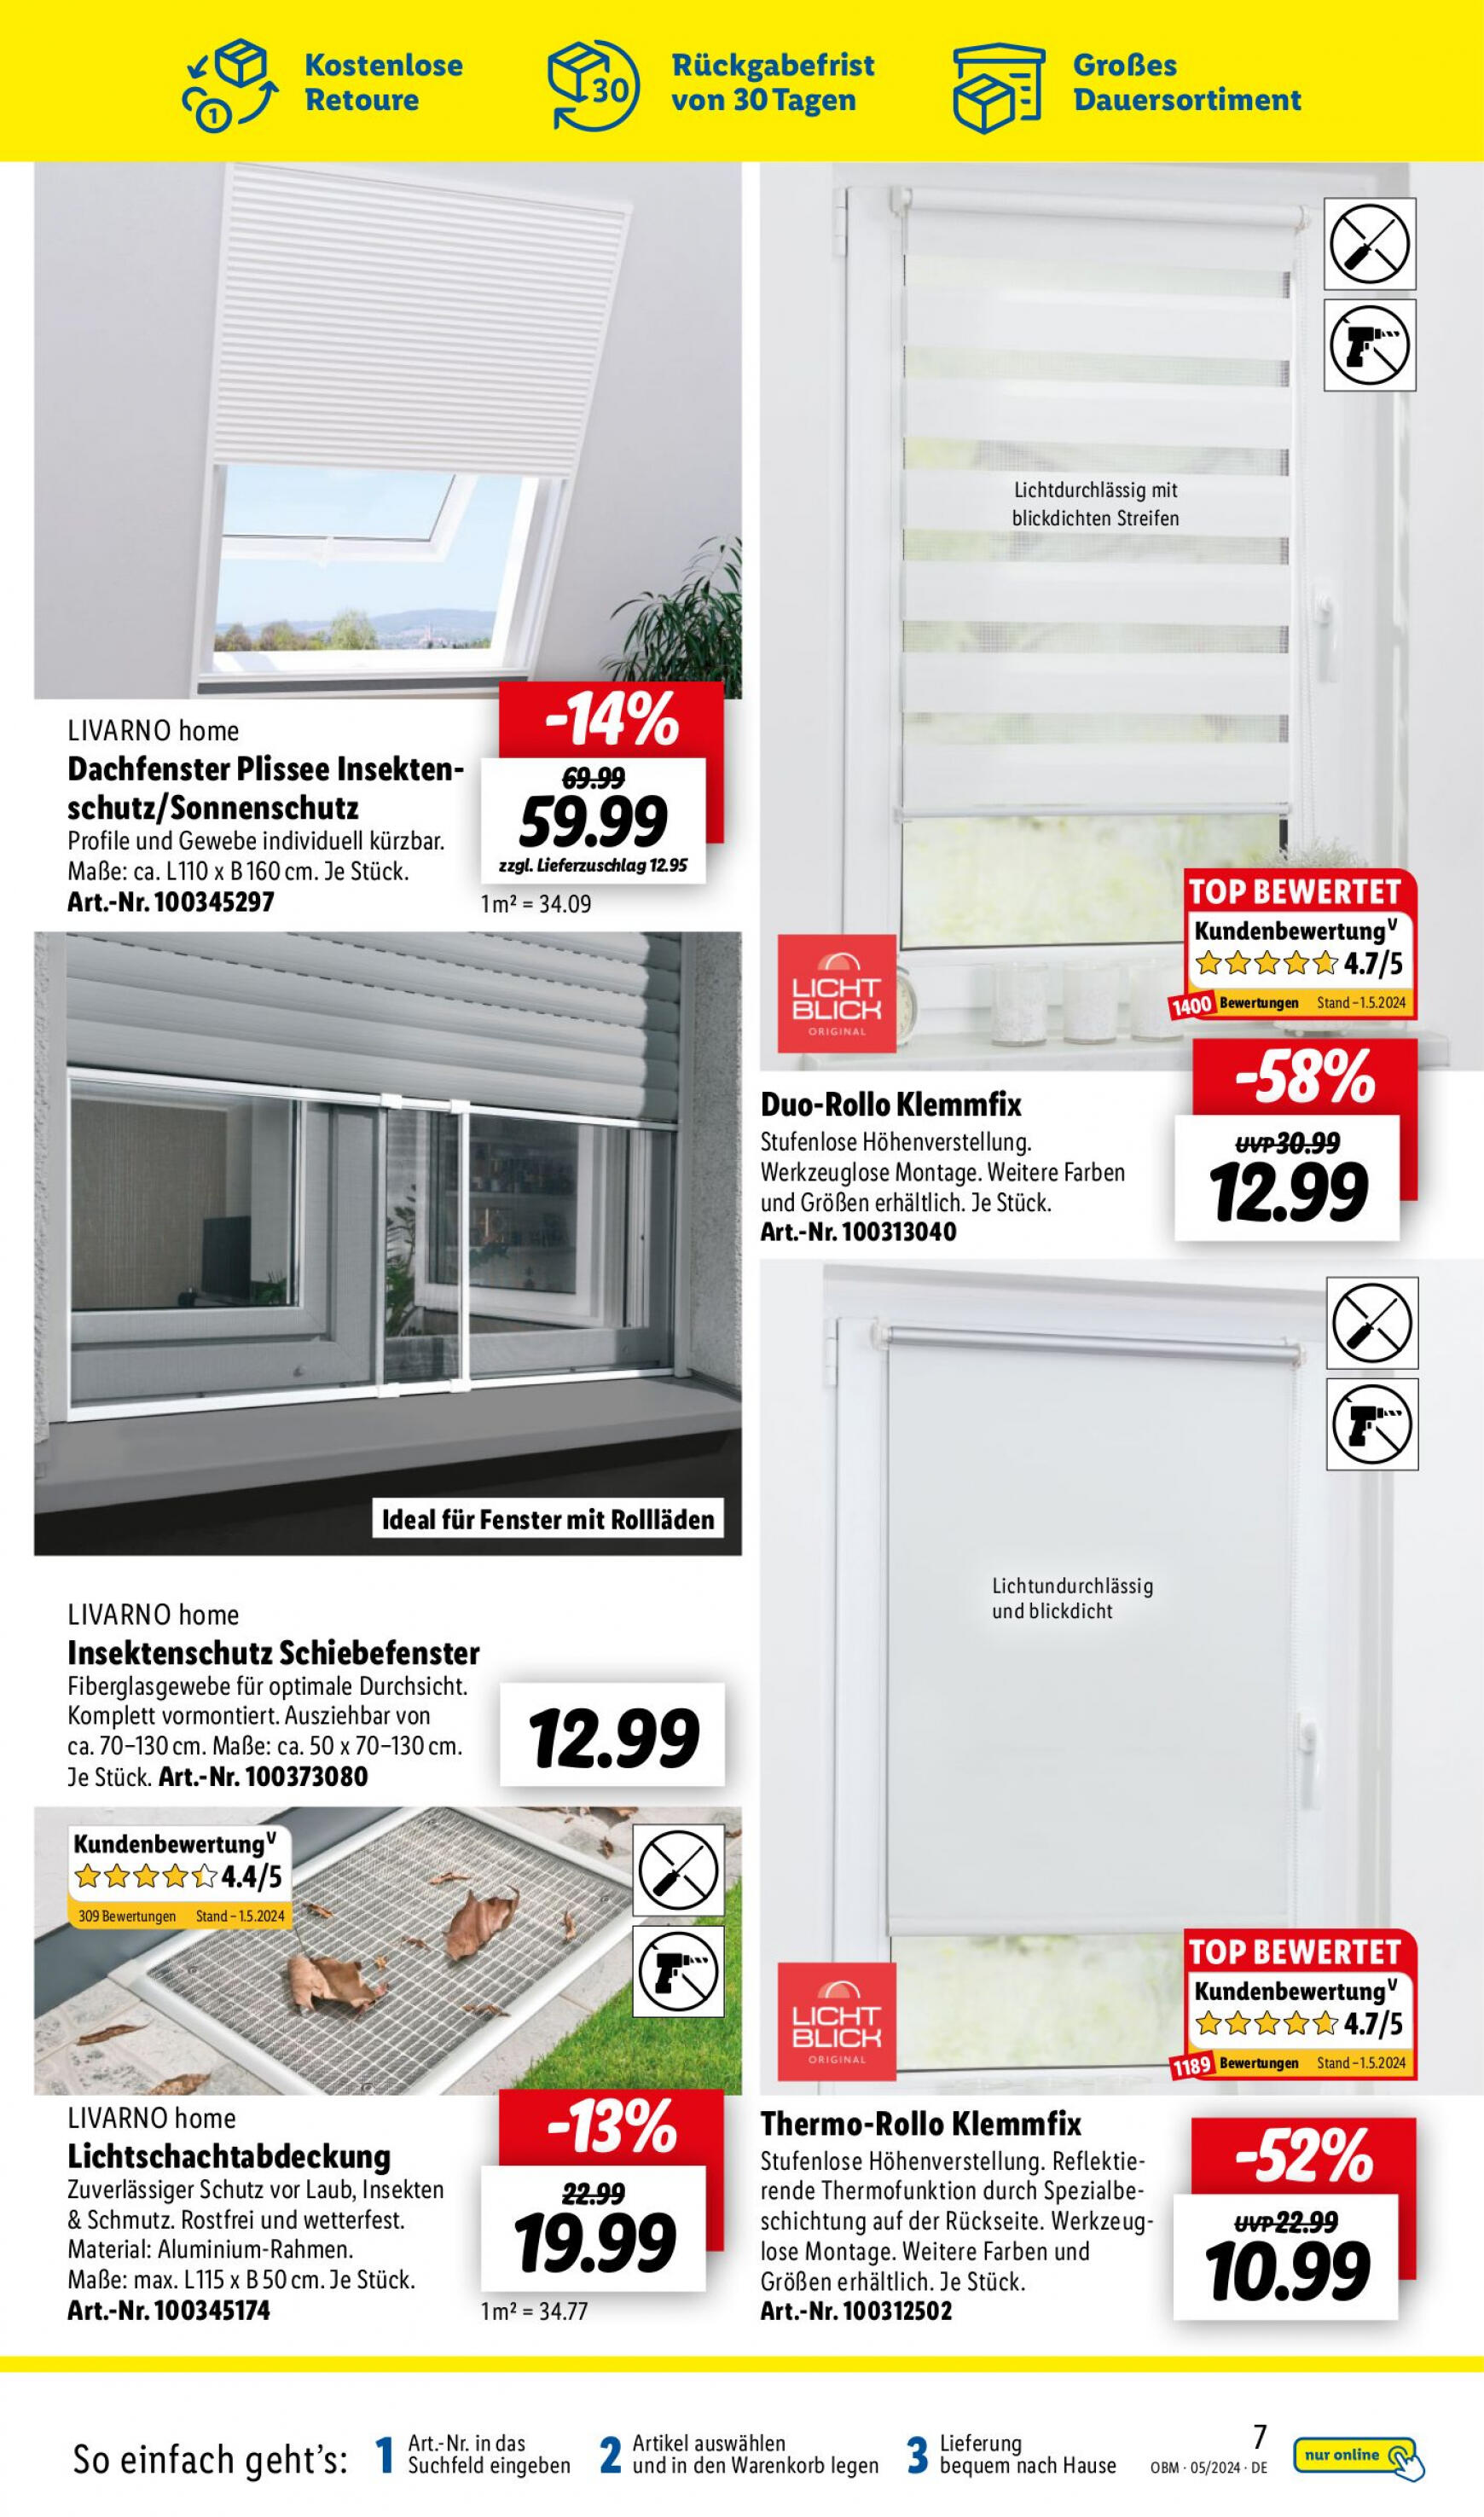 lidl - Flyer Lidl - Aktuelle Onlineshop-Highlights aktuell 01.05. - 31.05. - page: 7